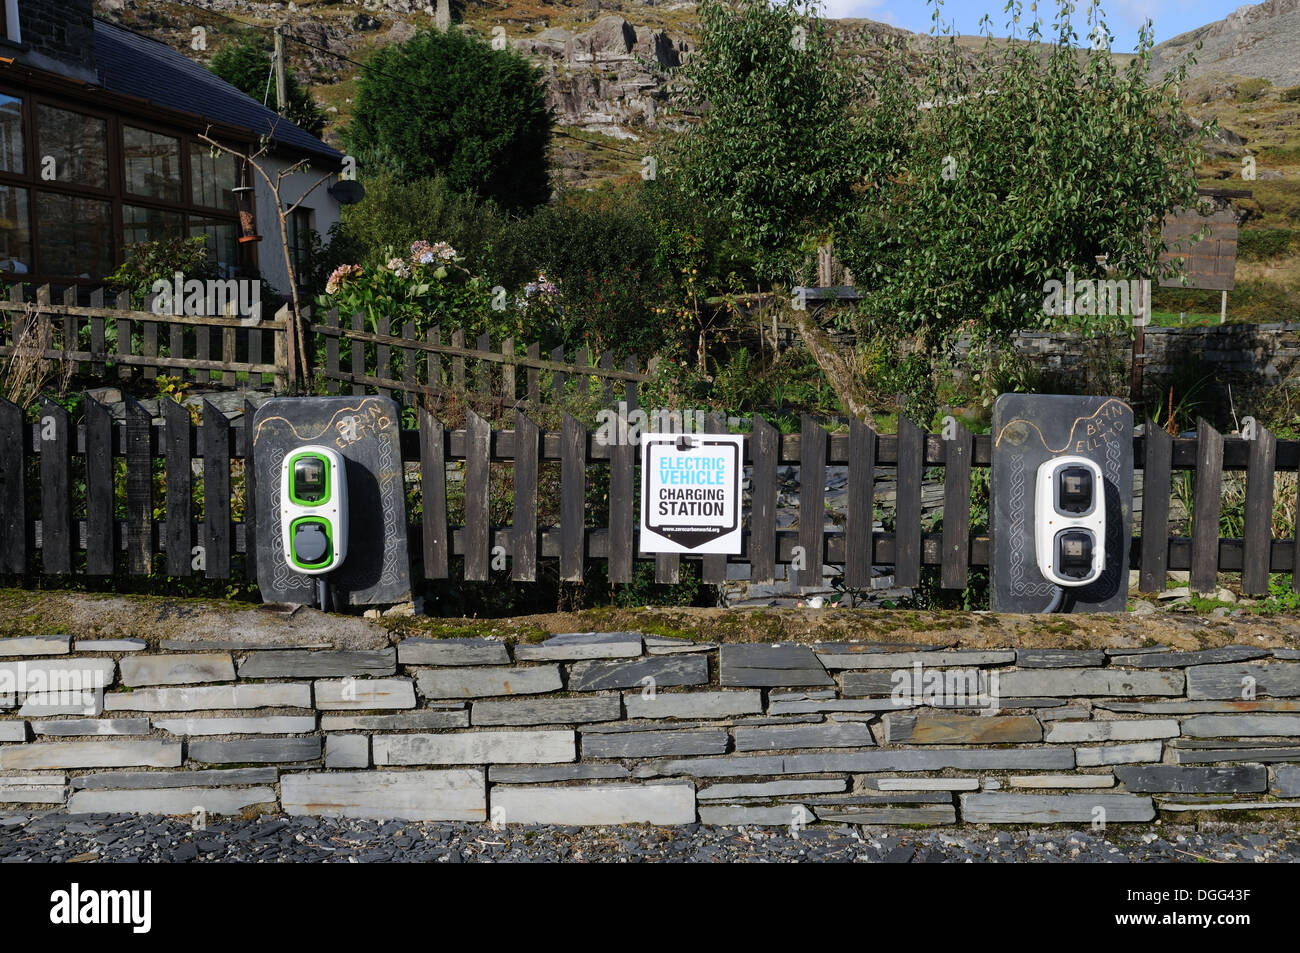 Electric Vehicle Charging Station on a fence outside a house in